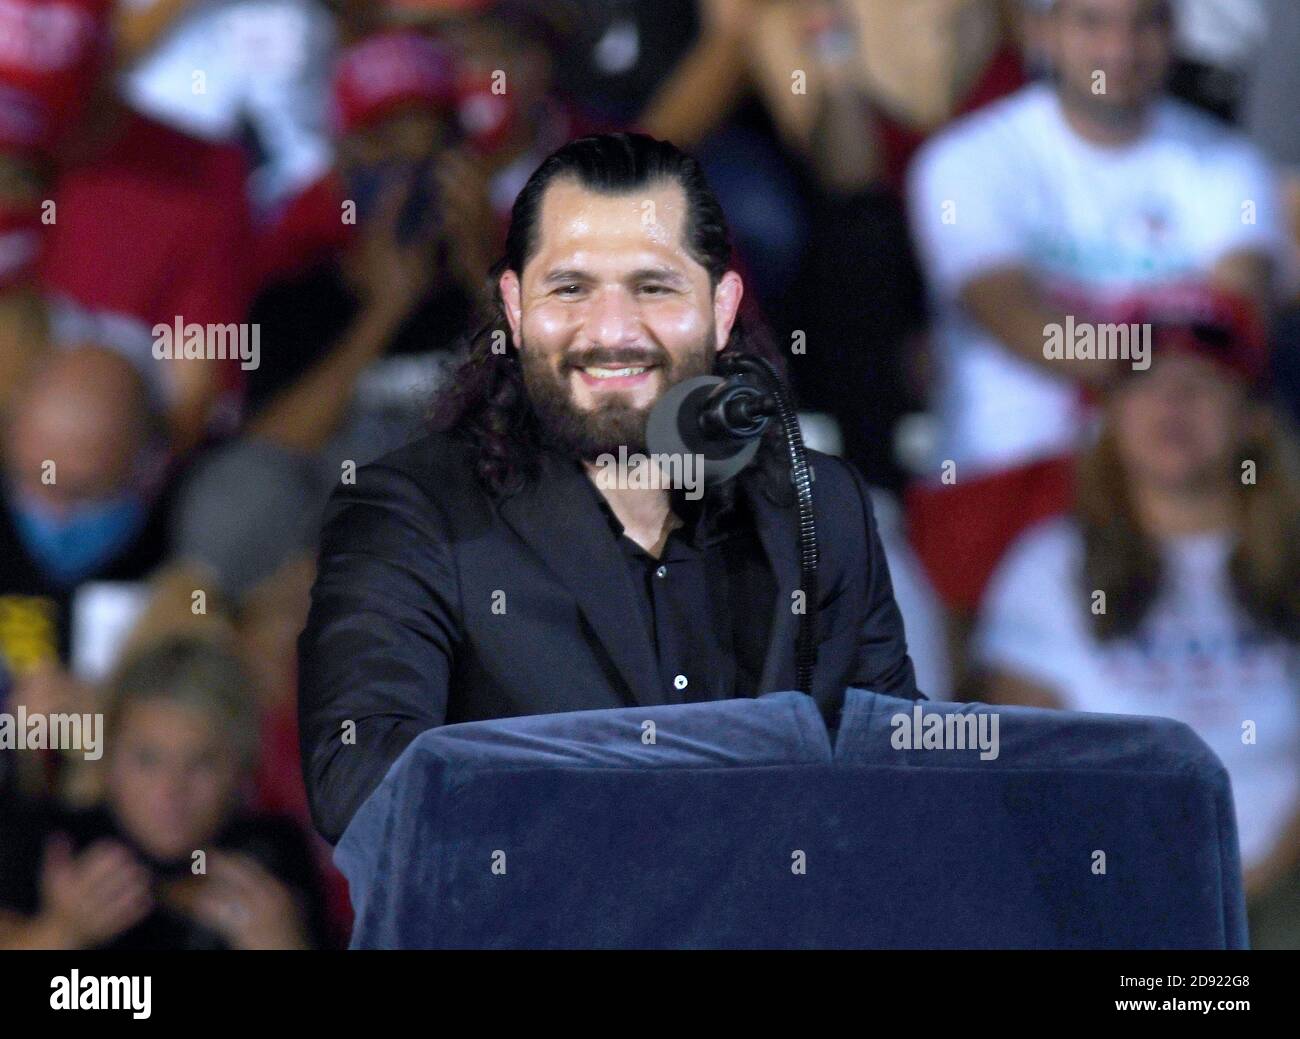 Opa Locka, United States. 01st Nov, 2020. November 1, 2020 - Opa-Locka, Florida, United States - UFC fighter Jorge Masvidal speaks to the crowd before the arrival of U.S. President Donald Trump at a campaign rally at Miami-Opa Locka Executive Airport on November 1, 2020 in Opa-Locka, Florida. President Trump held events in five states today, as he continues his campaign against Democratic presidential nominee Joe Biden two days before the November 3 election. Credit: Paul Hennessy/Alamy Live News Stock Photo